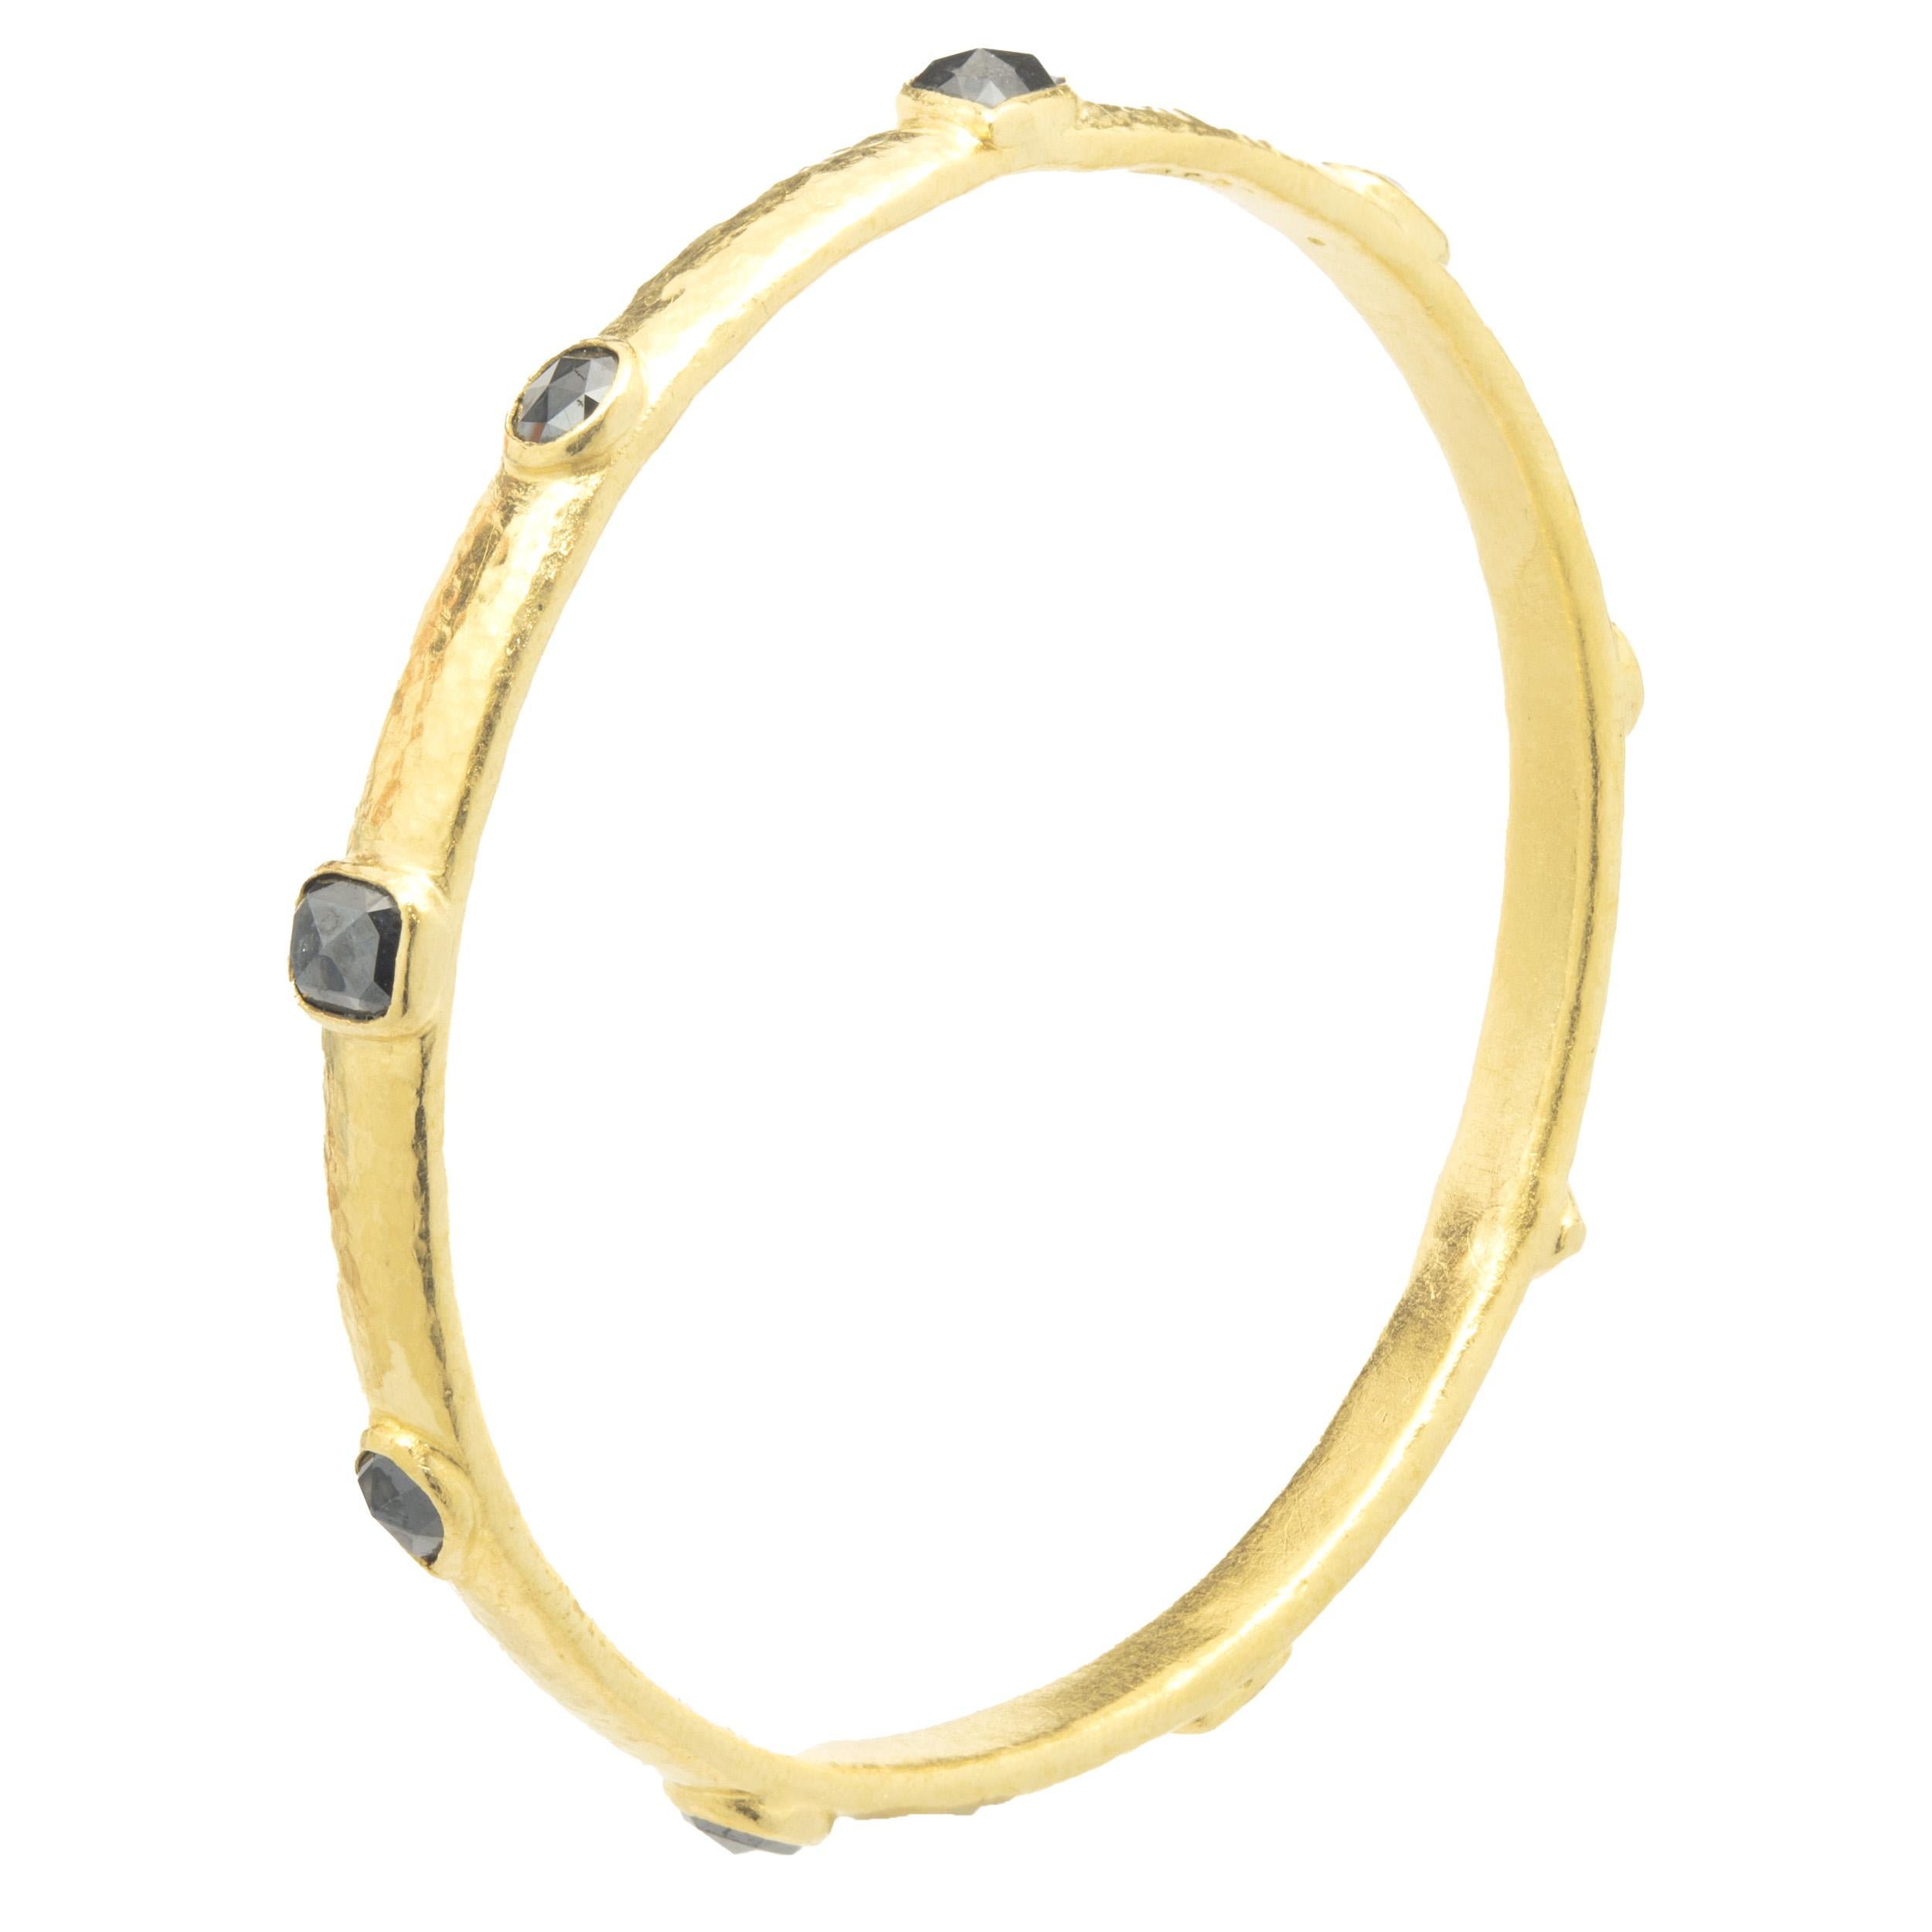 Designer: Gurhan
Material: 24K yellow gold
Diamond: multi cut = 2.50cttw
Color:  Black
Clarity: SI2
Measurement: bracelet will fit up to a 7-inch wrist
Weight: 25.20 grams